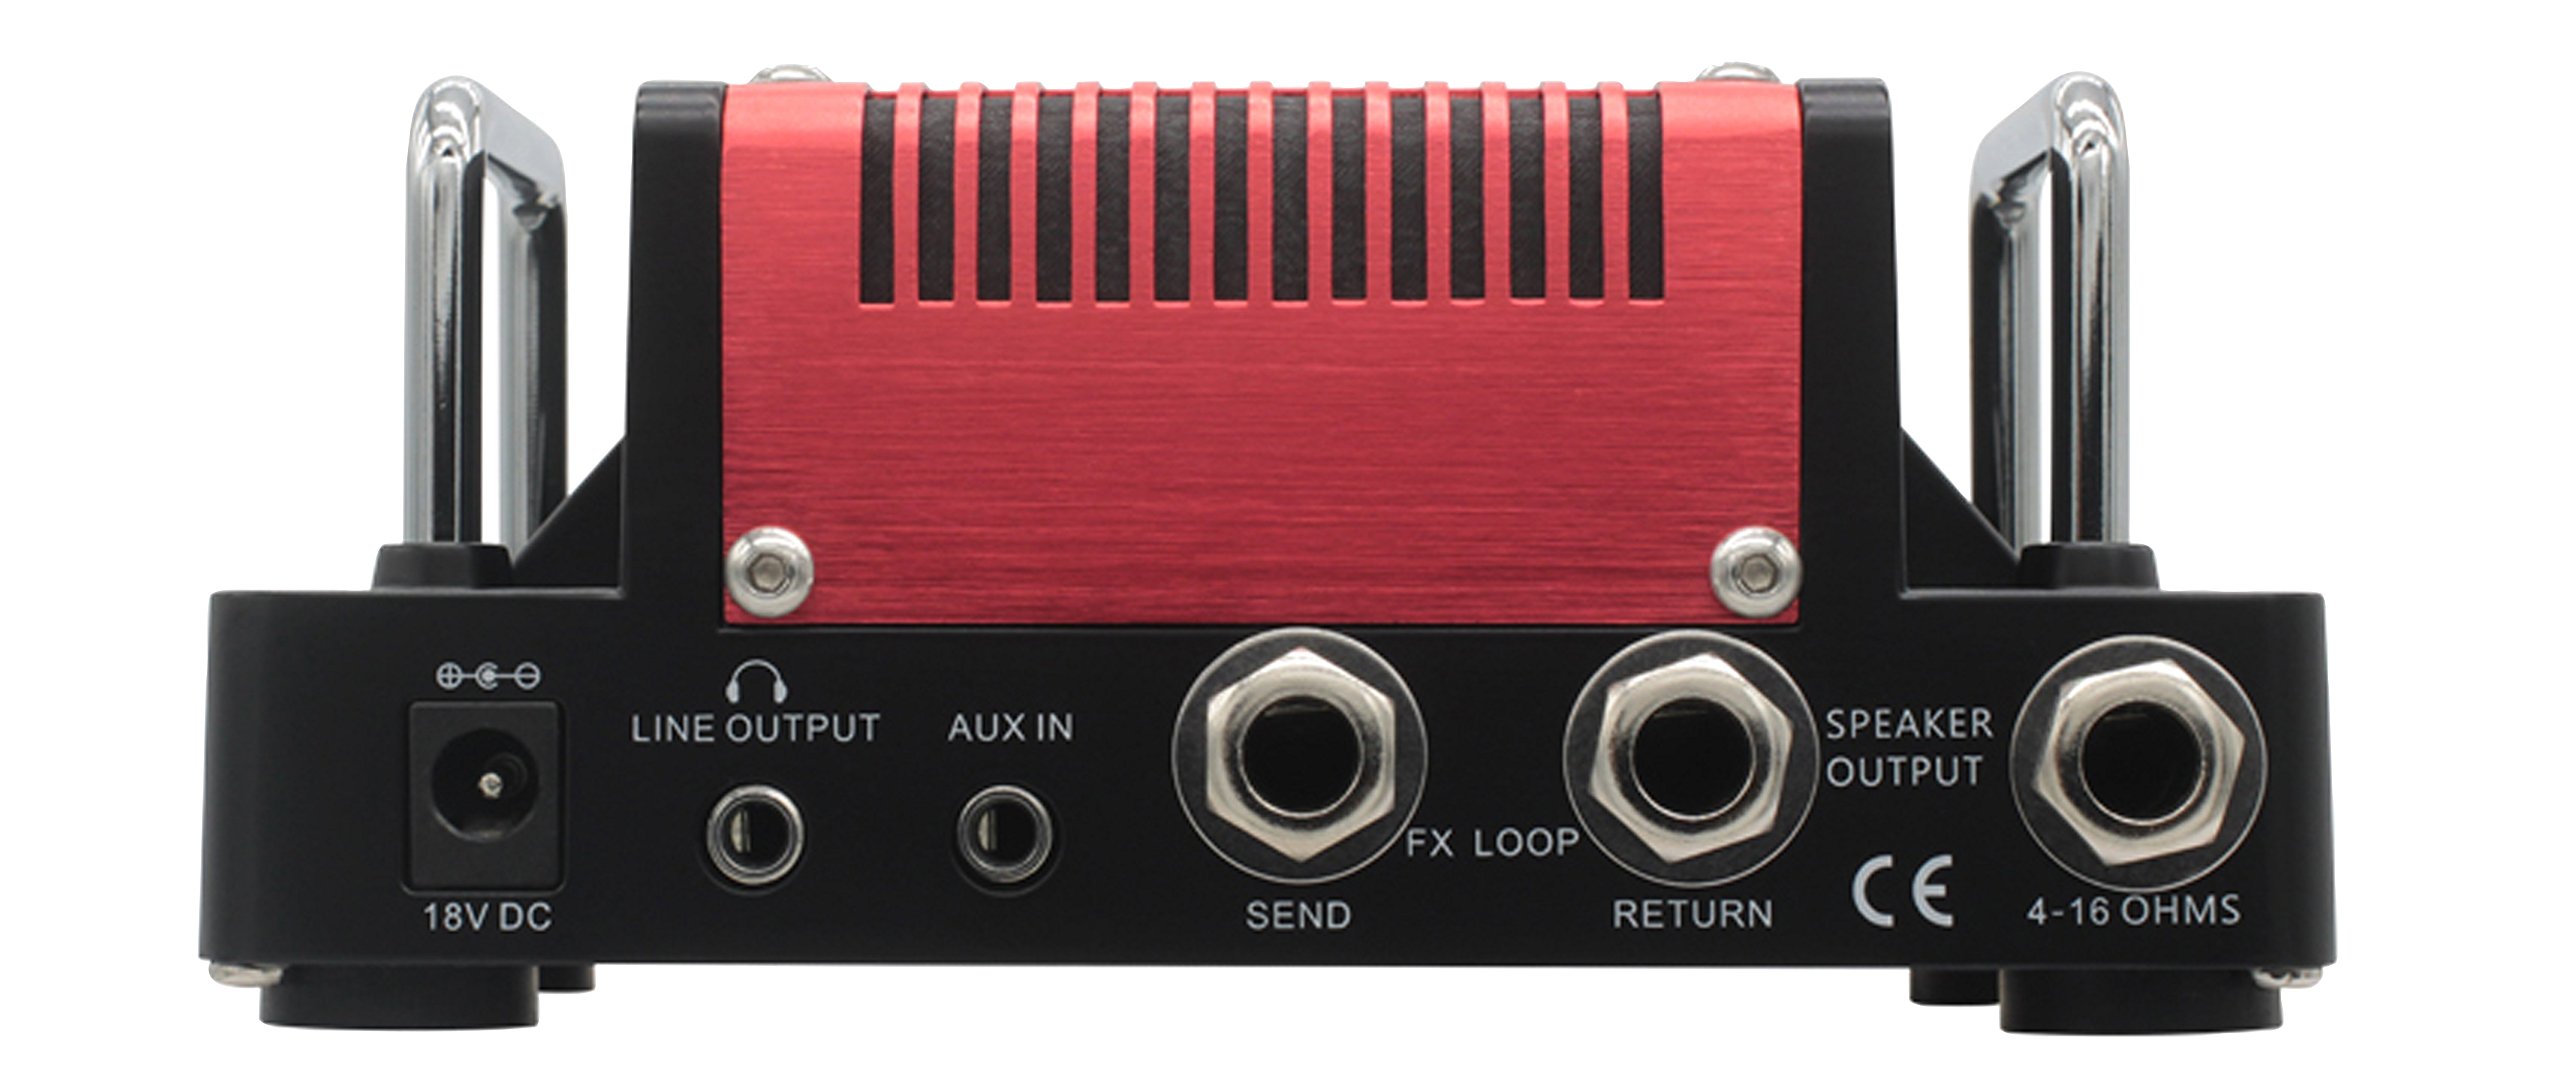 Hotone Nano Legacy Heart Attack Portable Guitar Amplifier Head - Red - image 2 of 2